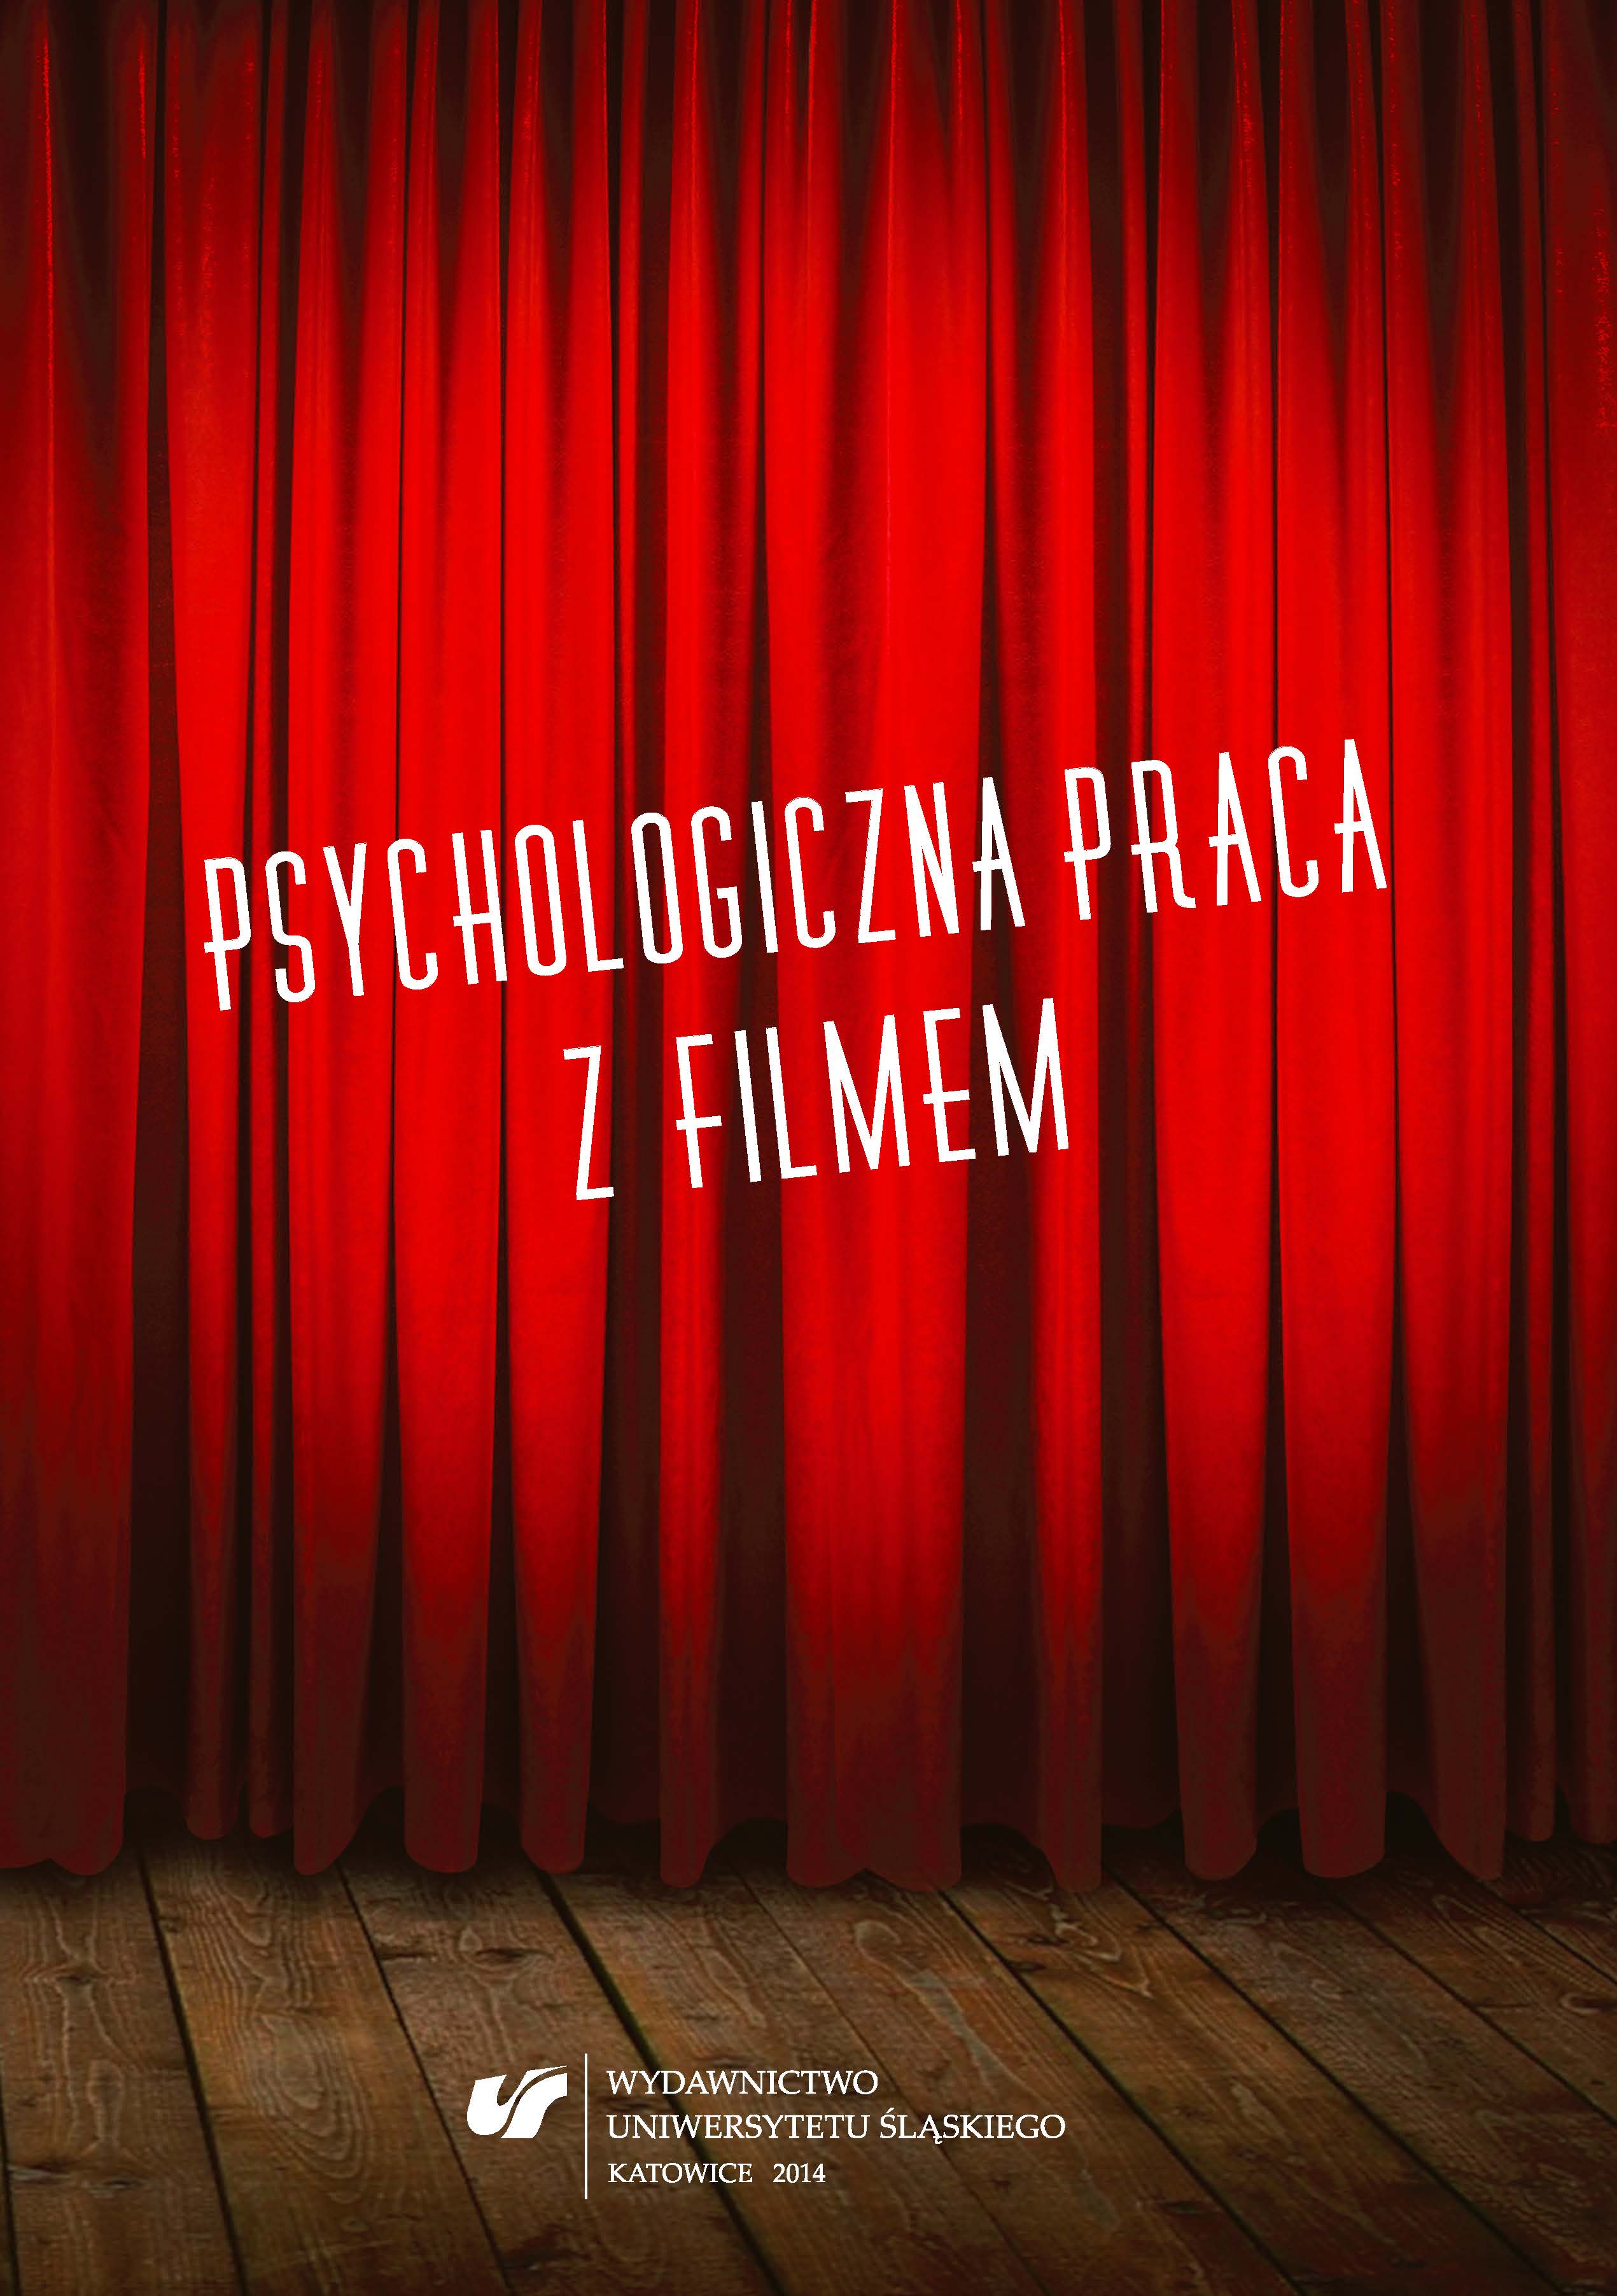 Psychological work with the film